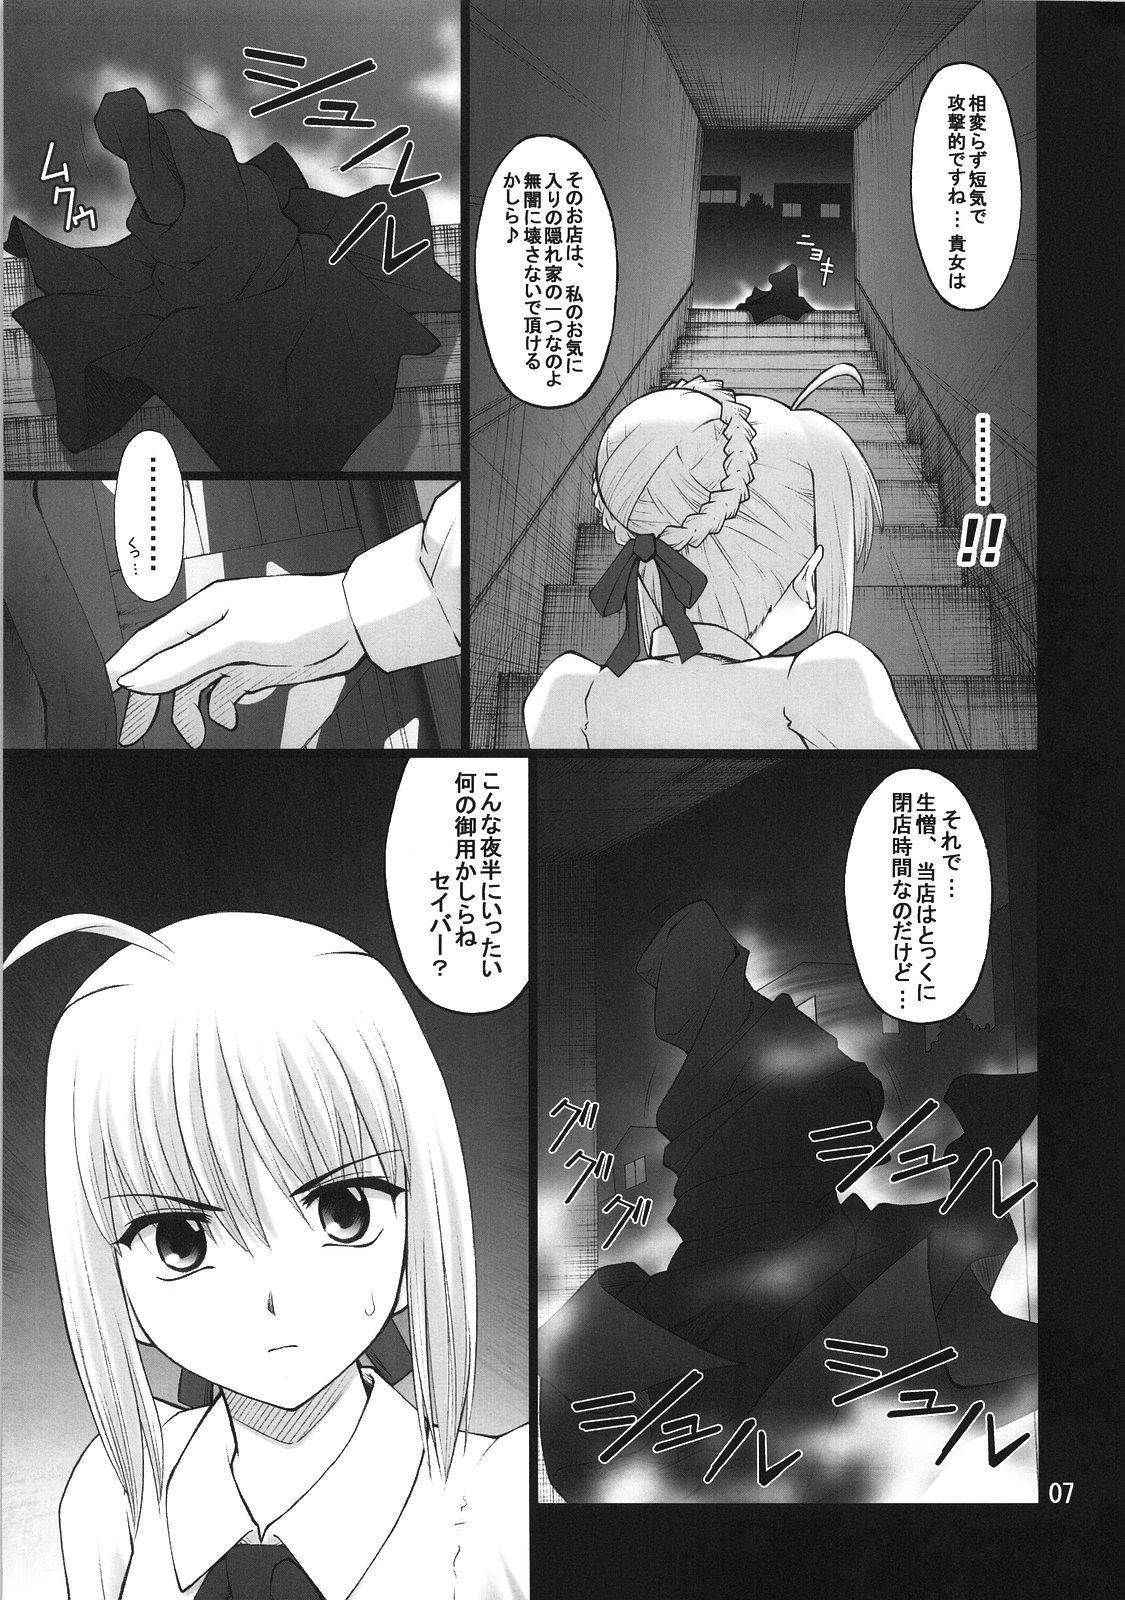 Gay 3some Grem-Rin 3 - Fate stay night Fate hollow ataraxia Compilation - Page 6